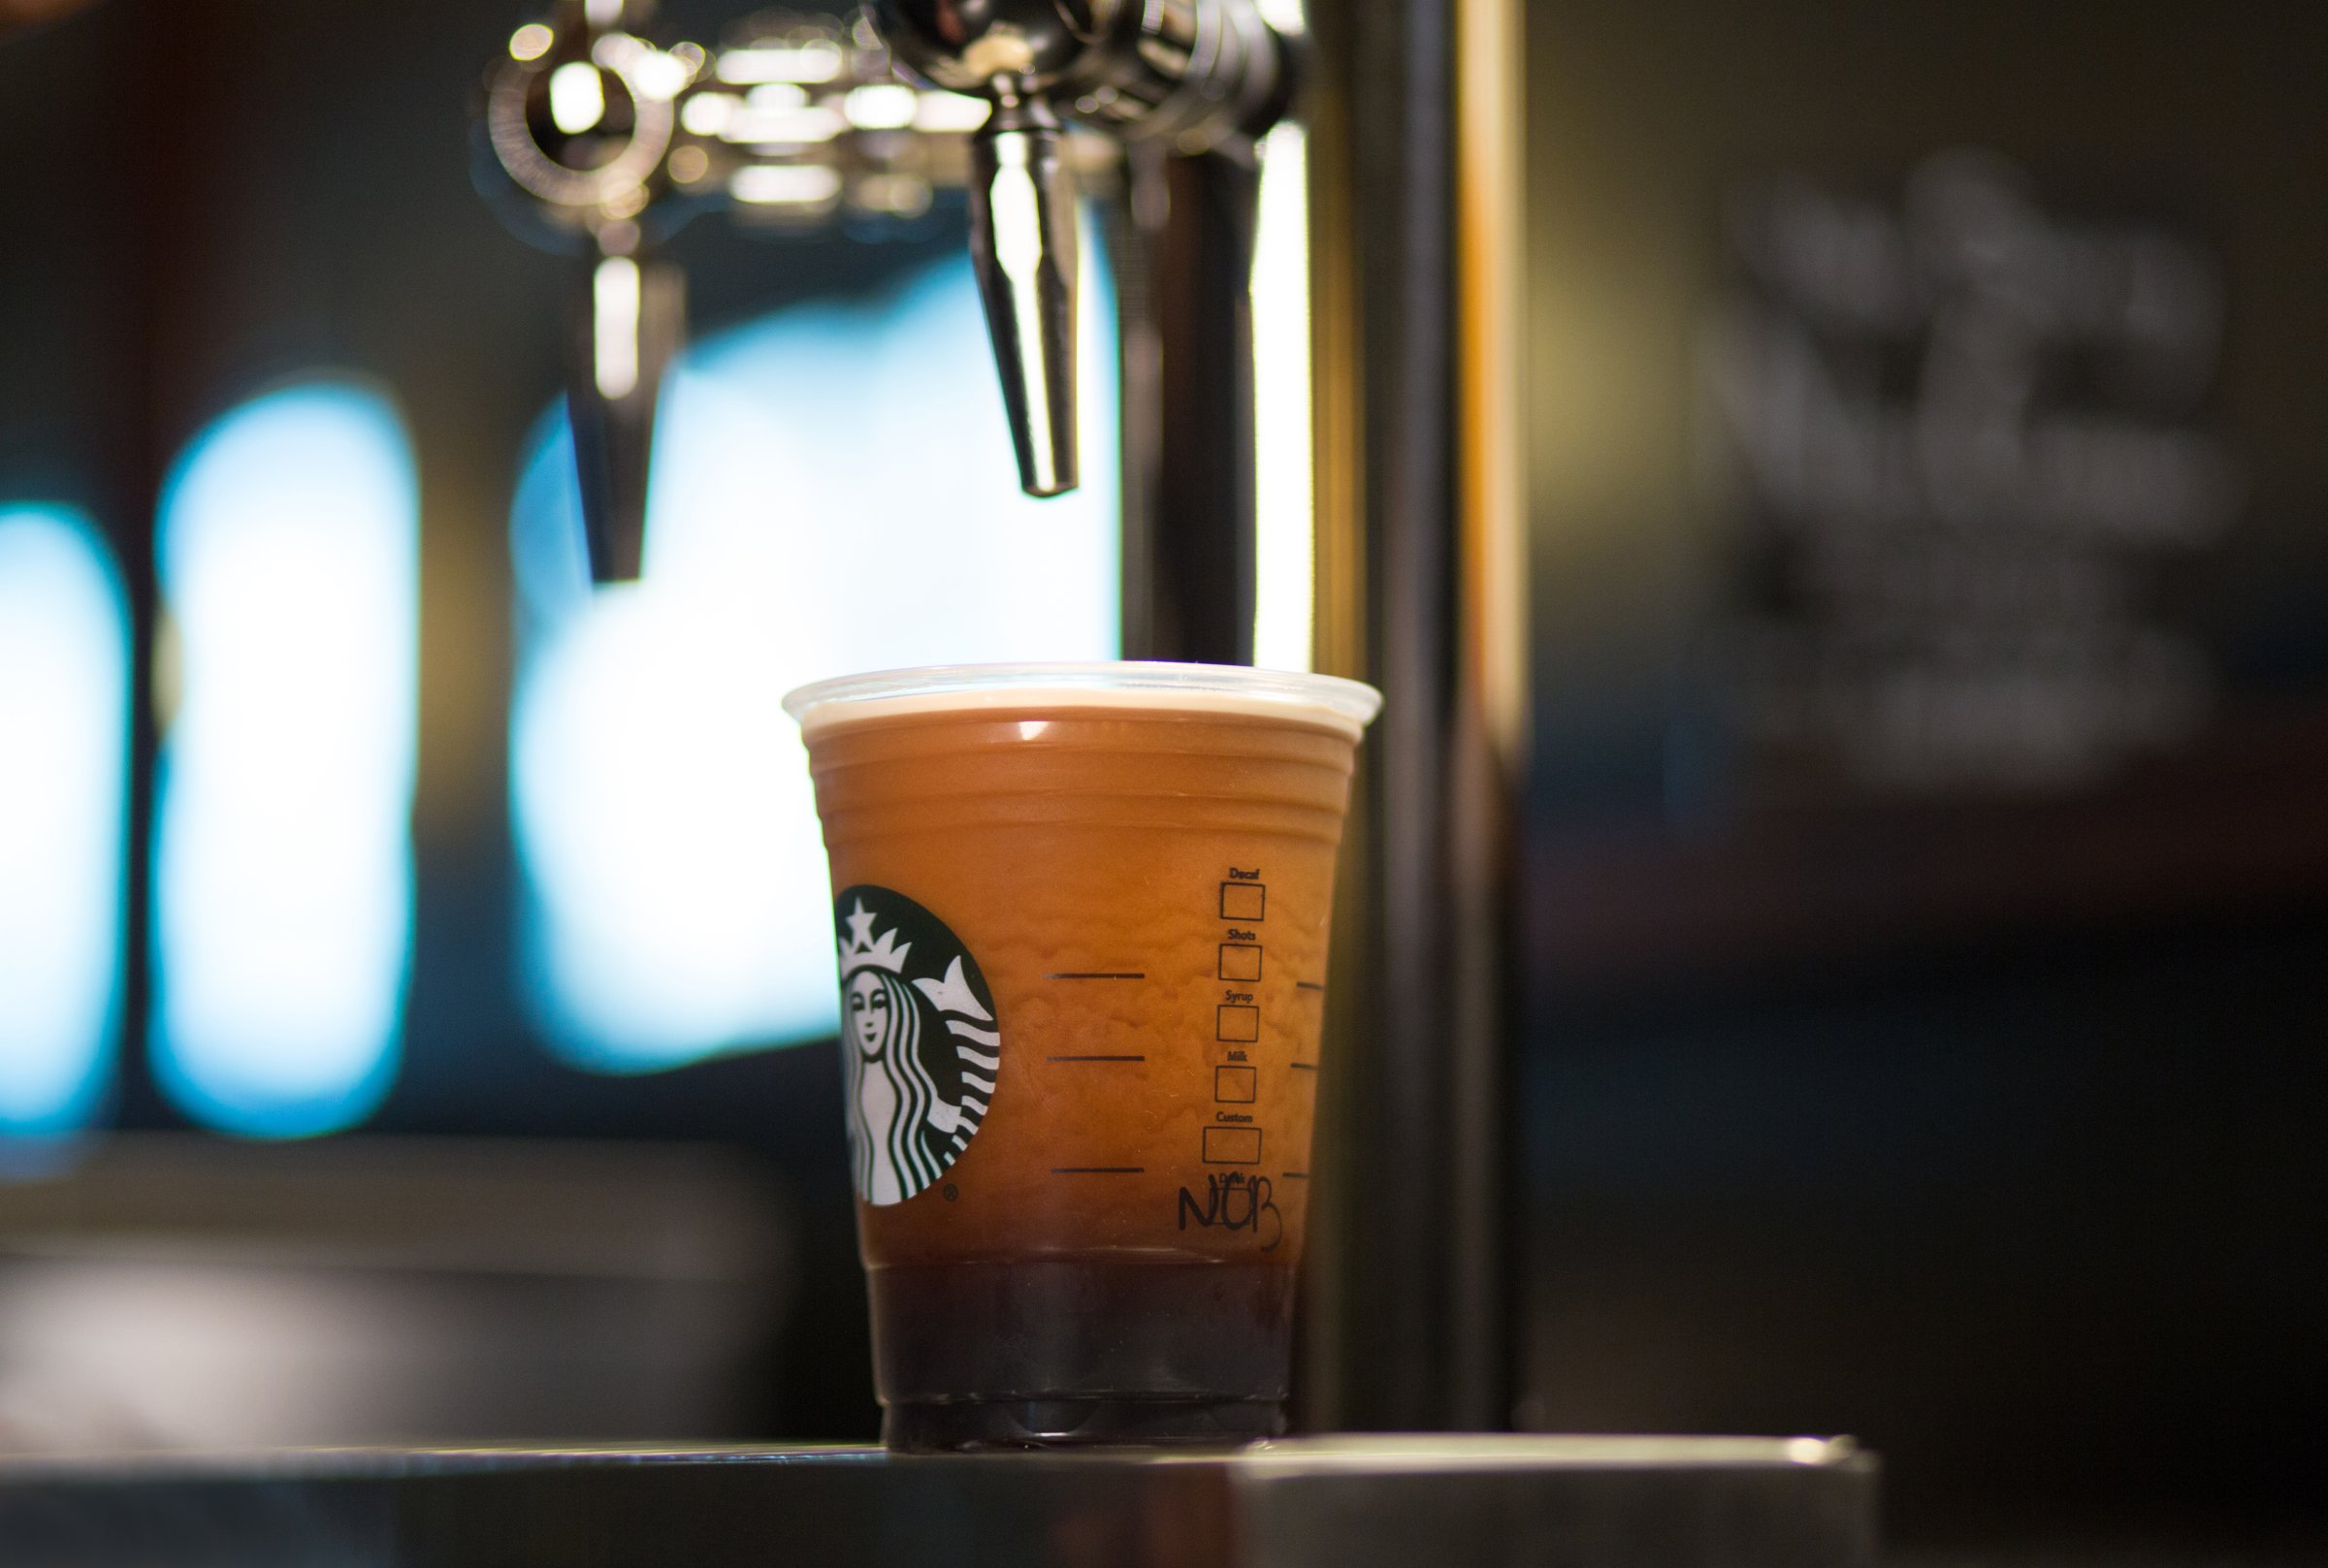 Starbucks Nitro Cold Brew photographed at the Olive Way Starbucks store in Seattle. Photographed on Tuesday, May 24, 2016.